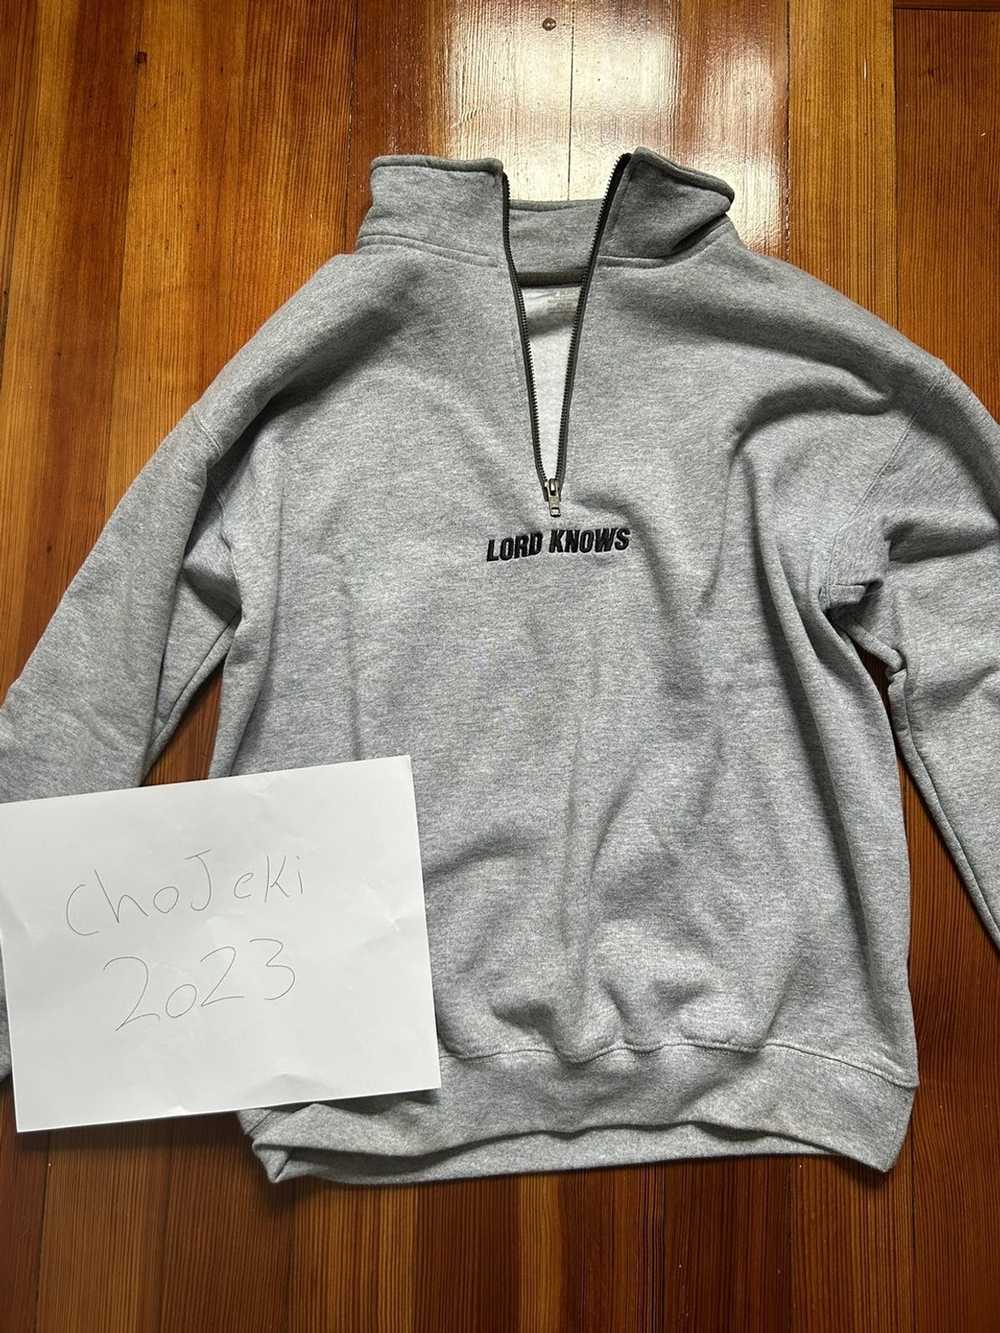 Lxrdknows Lord Knows Collared Zip up - image 3